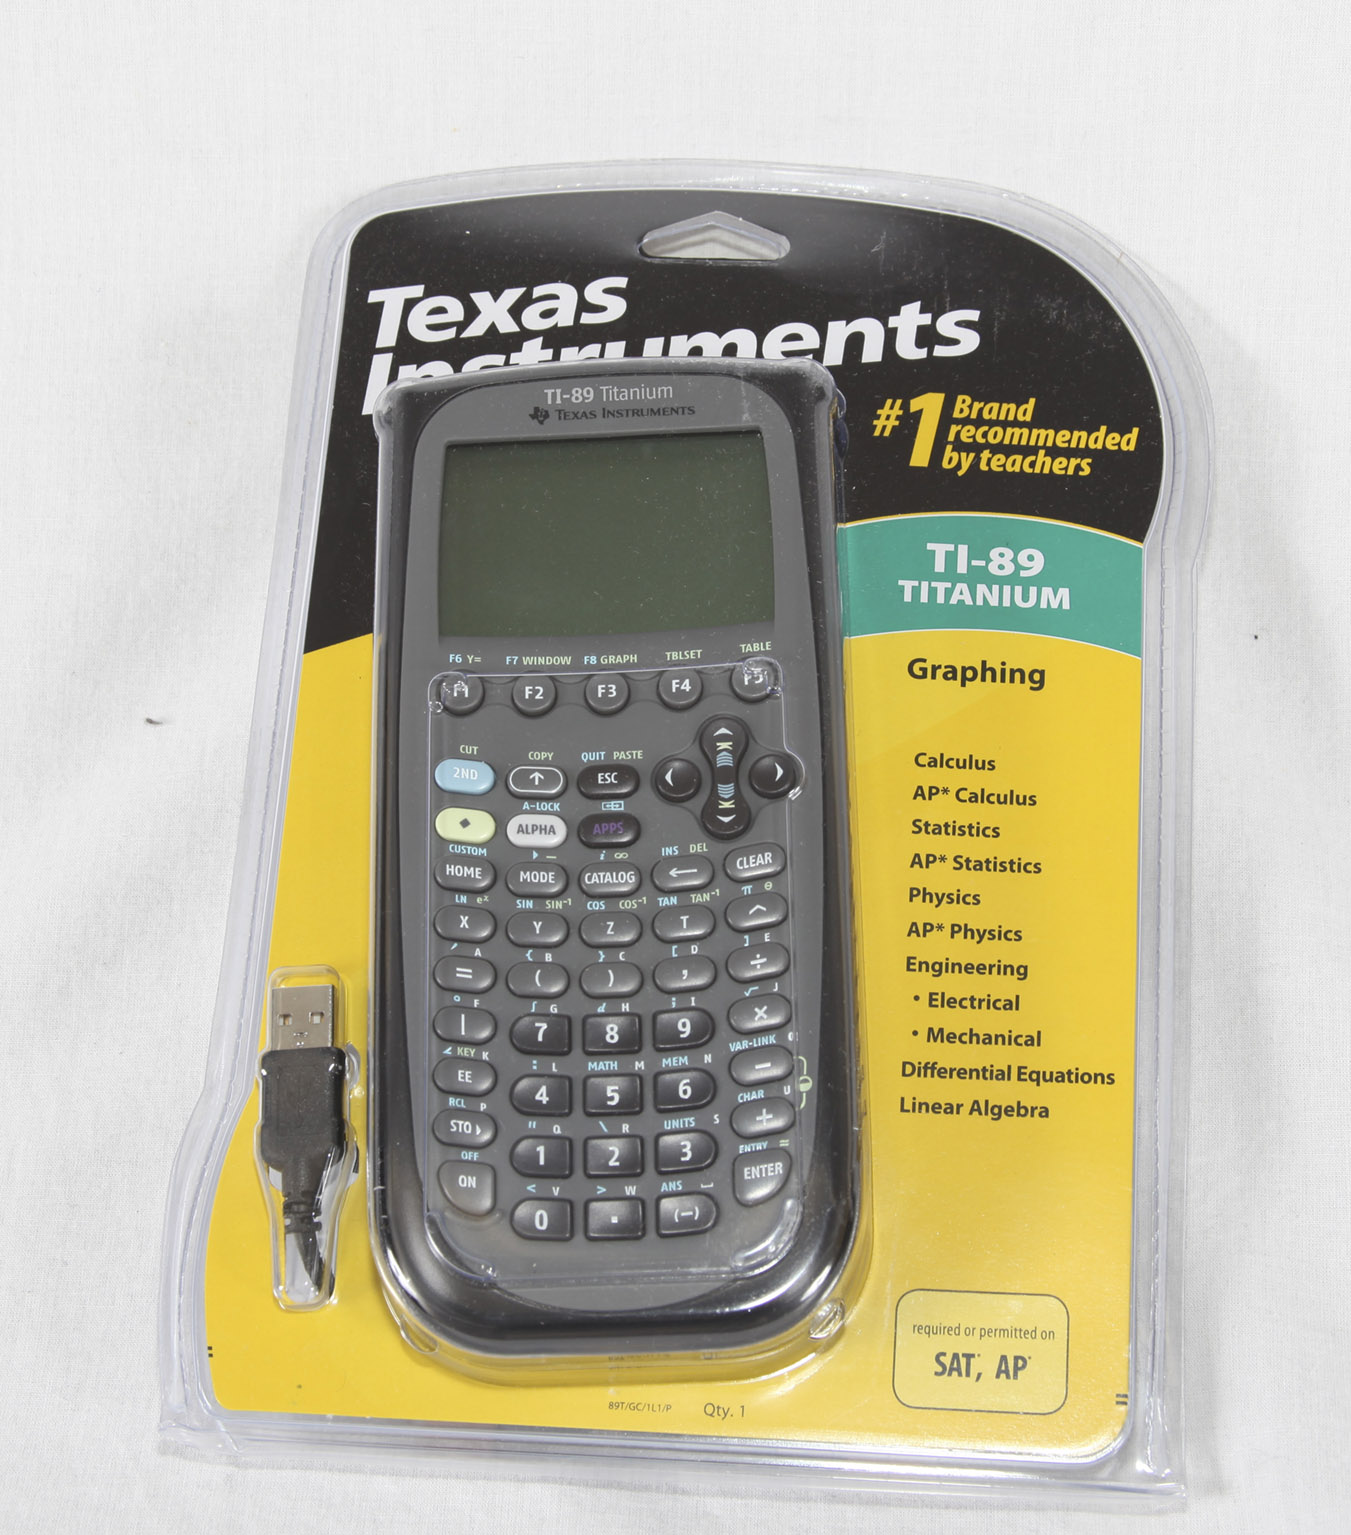 Texas Instruments Ti-89 Advanced Graphing Calculator Manual